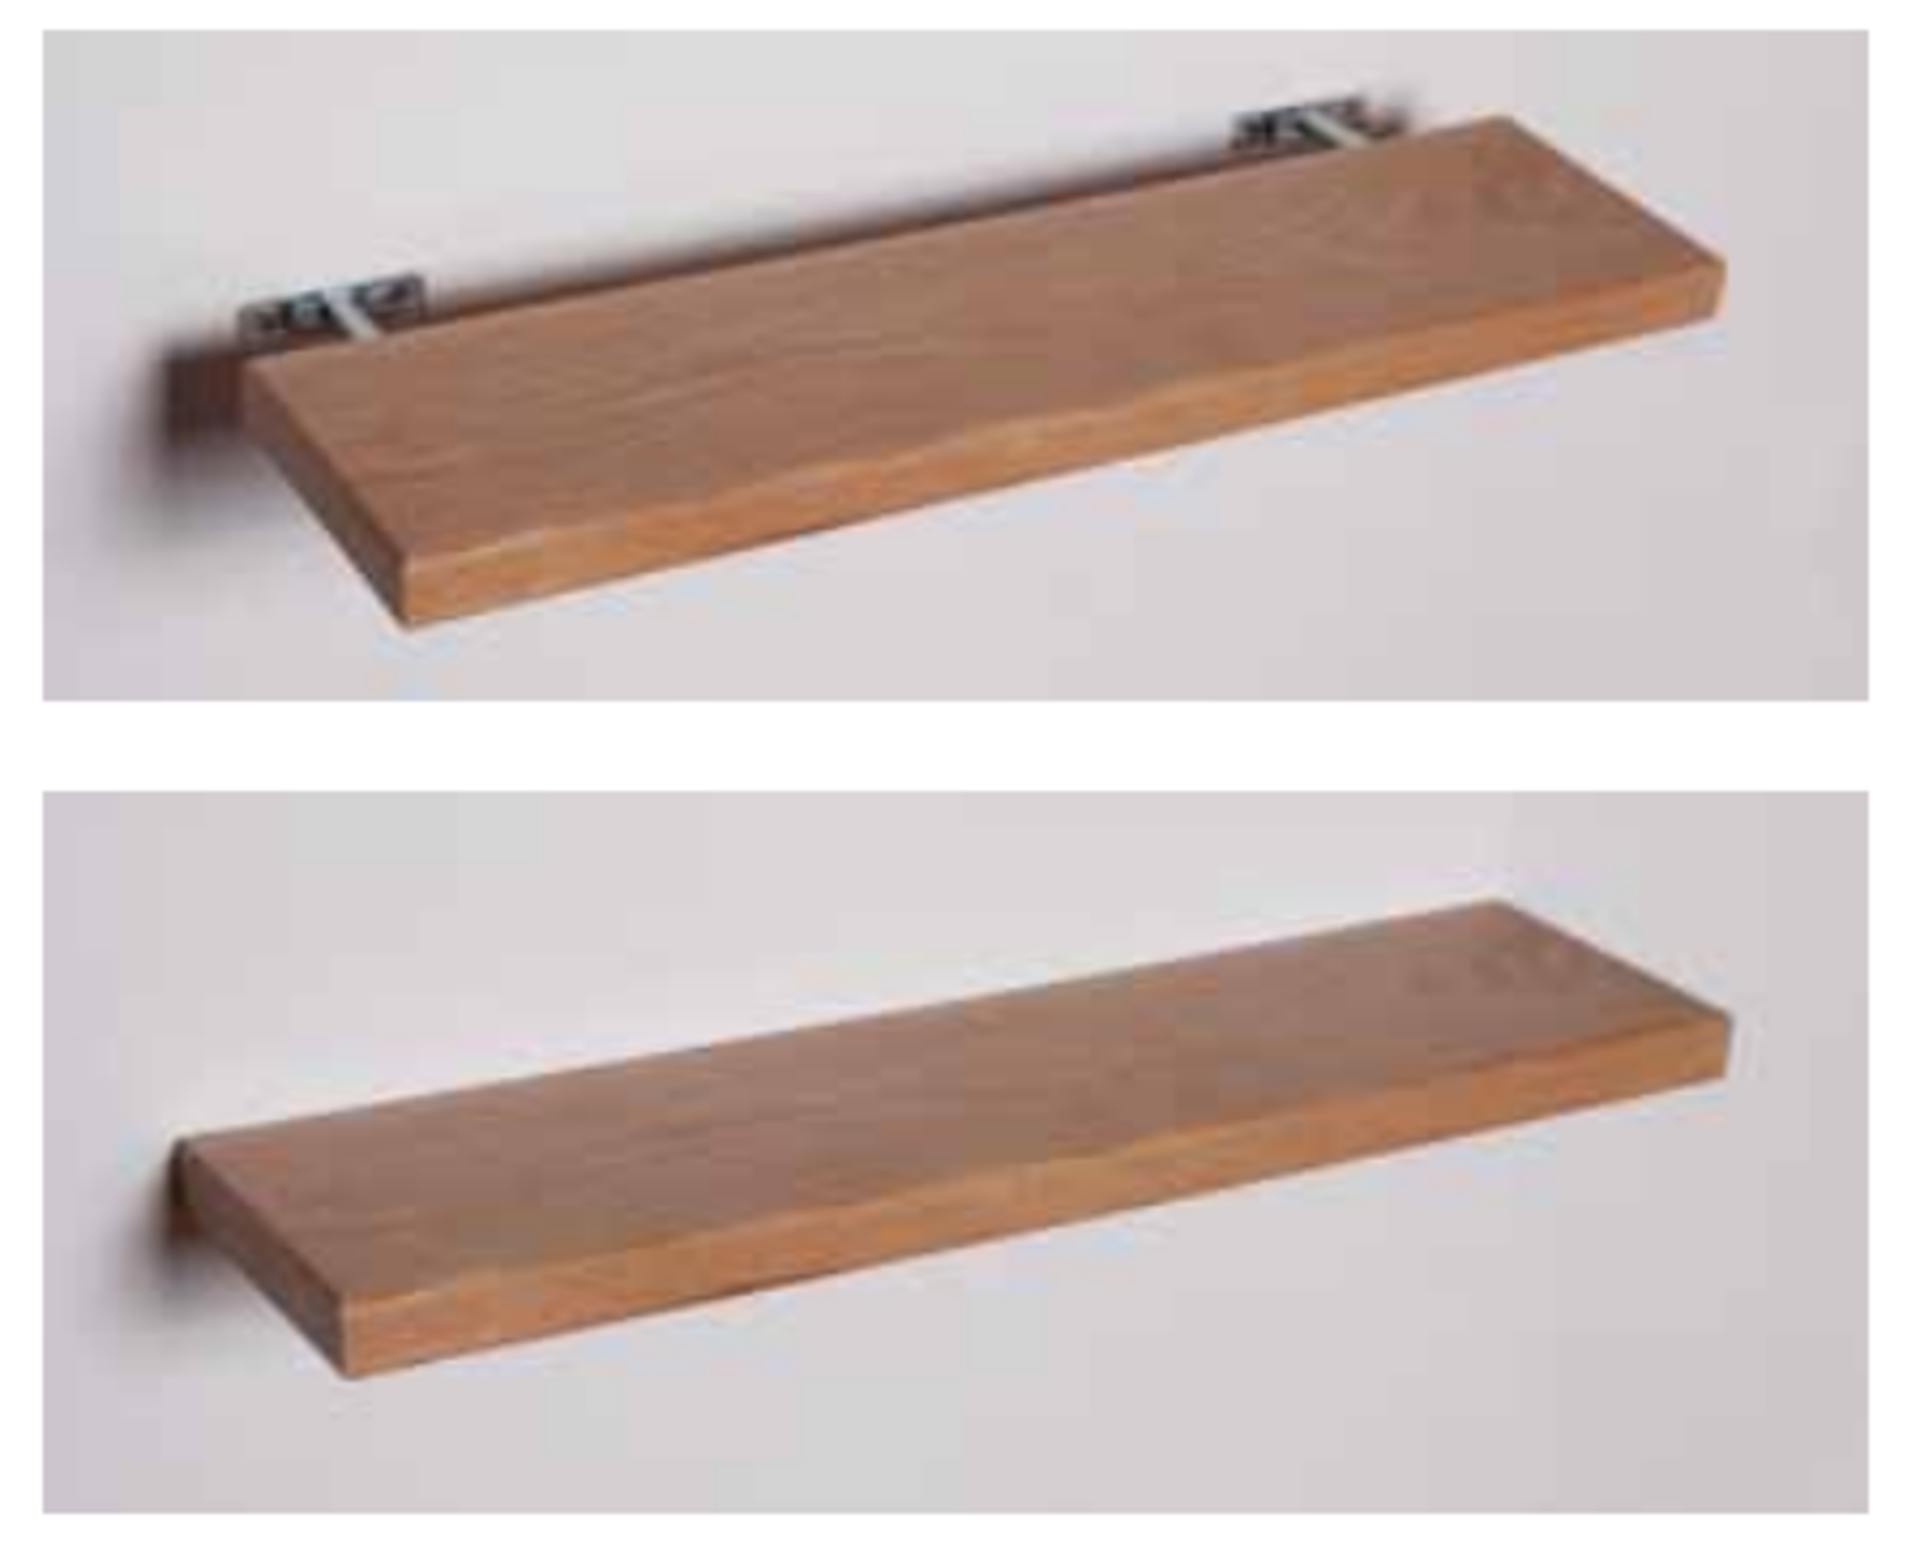 1 x Stonearth Bathroom Storage Shelf With Concealed Brackets - American Solid Walnut - Size: 300mm - Image 2 of 19